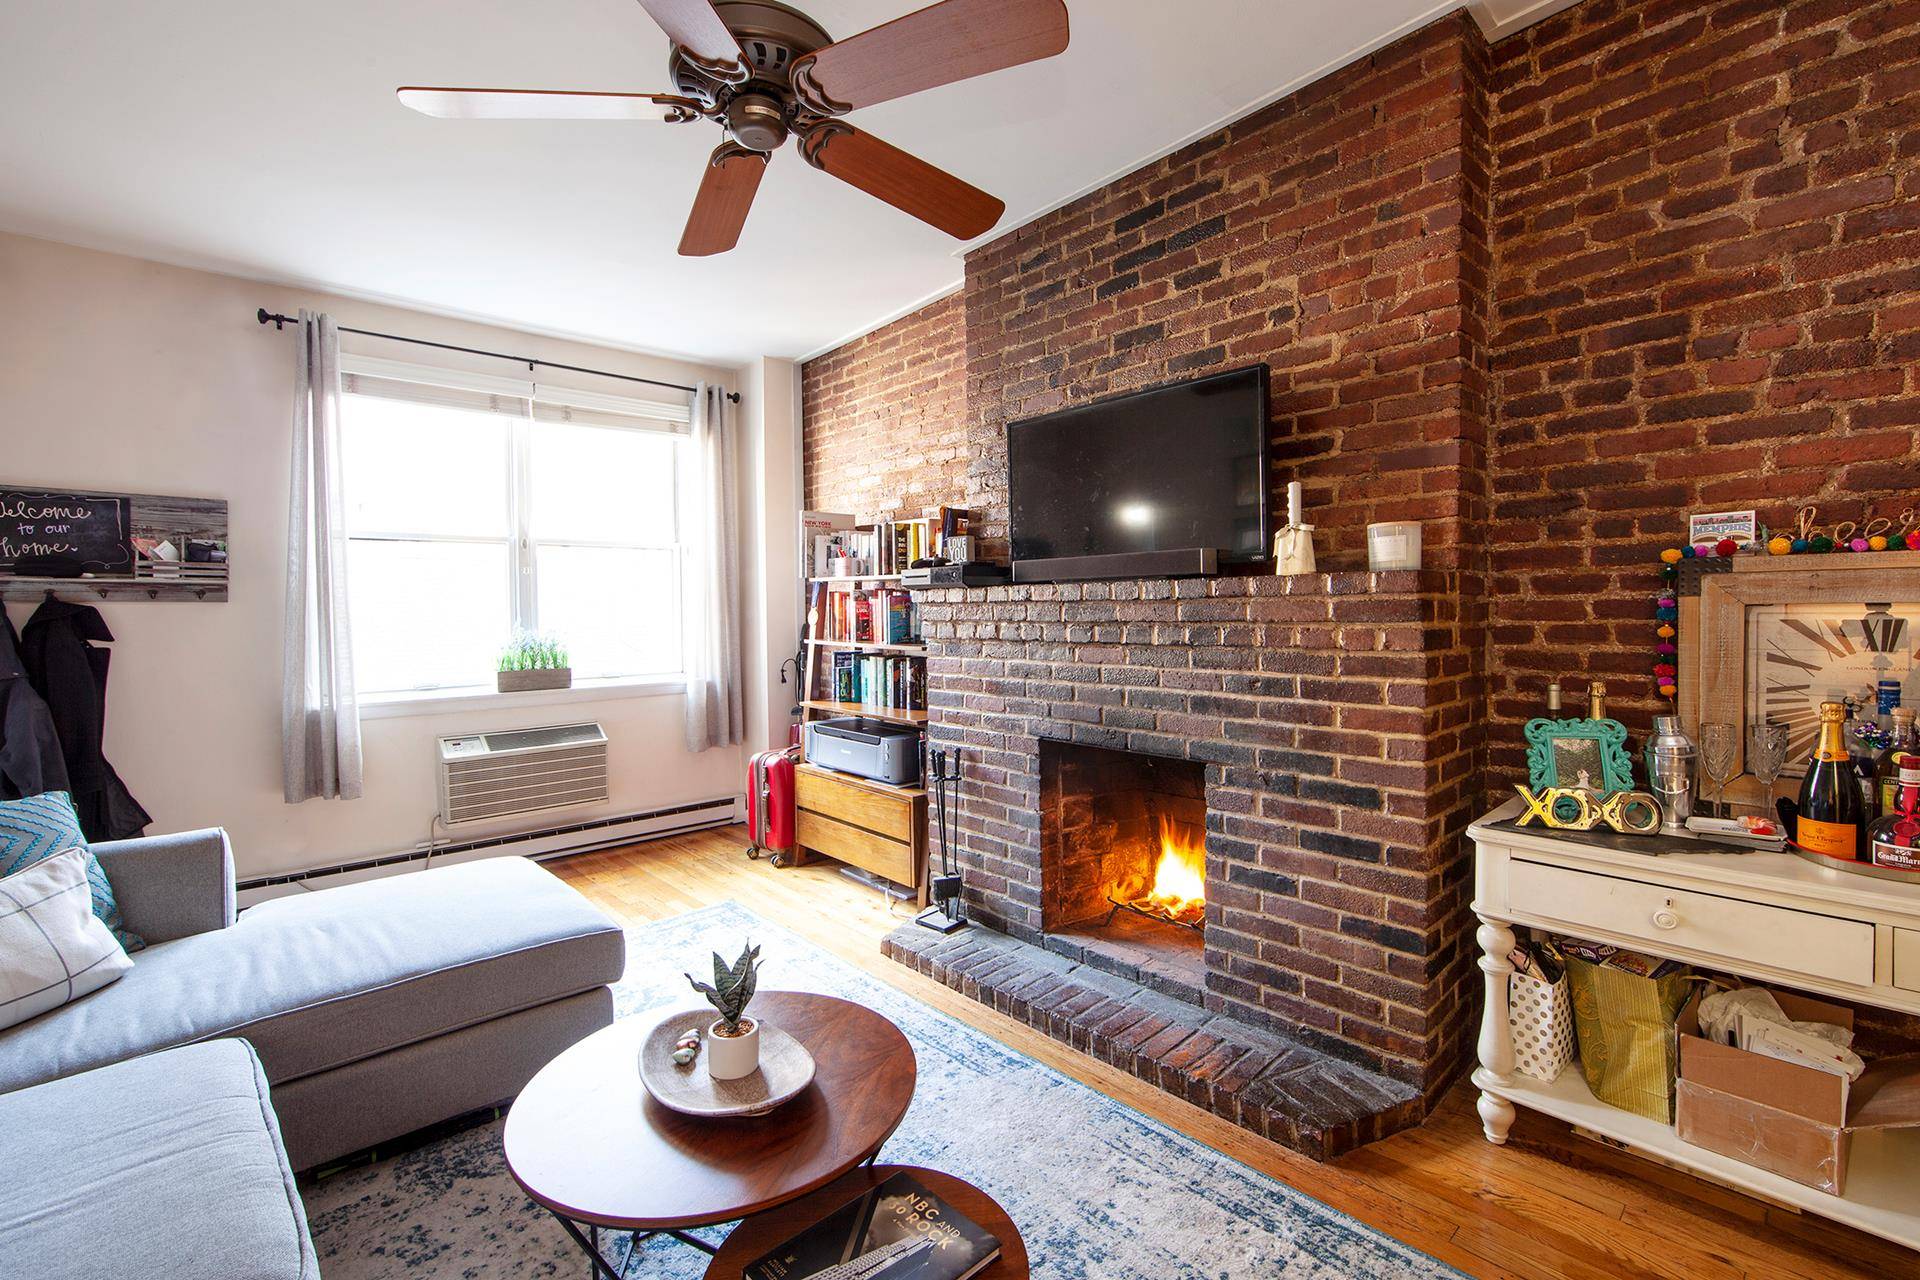 Beautiful 1 bedroom apartment to call home on the dreamy upper west side.